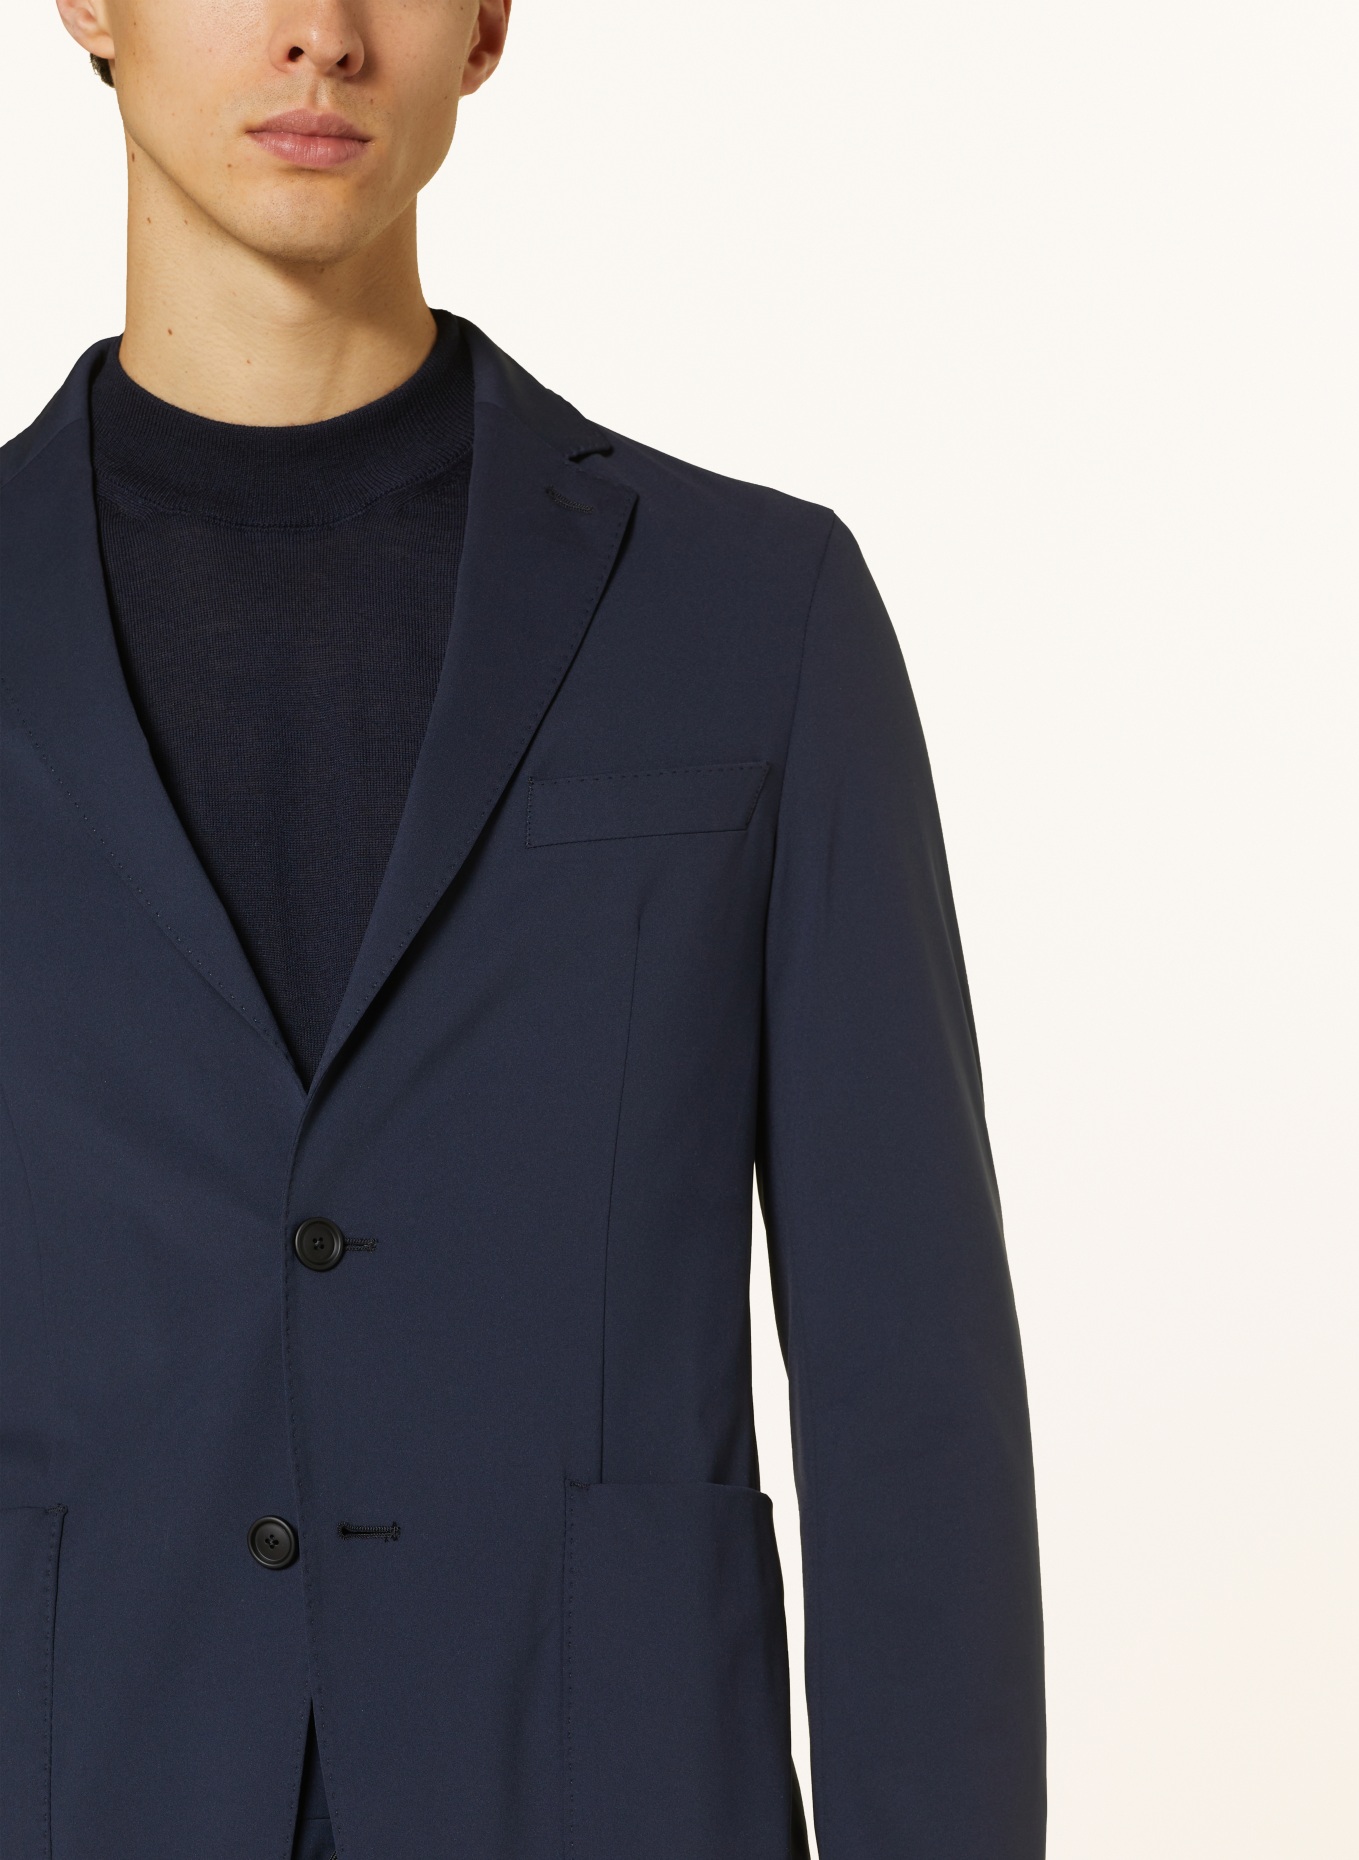 BOSS Suit jacket HANRY extra slim fit made of jersey, Color: DARK BLUE (Image 5)